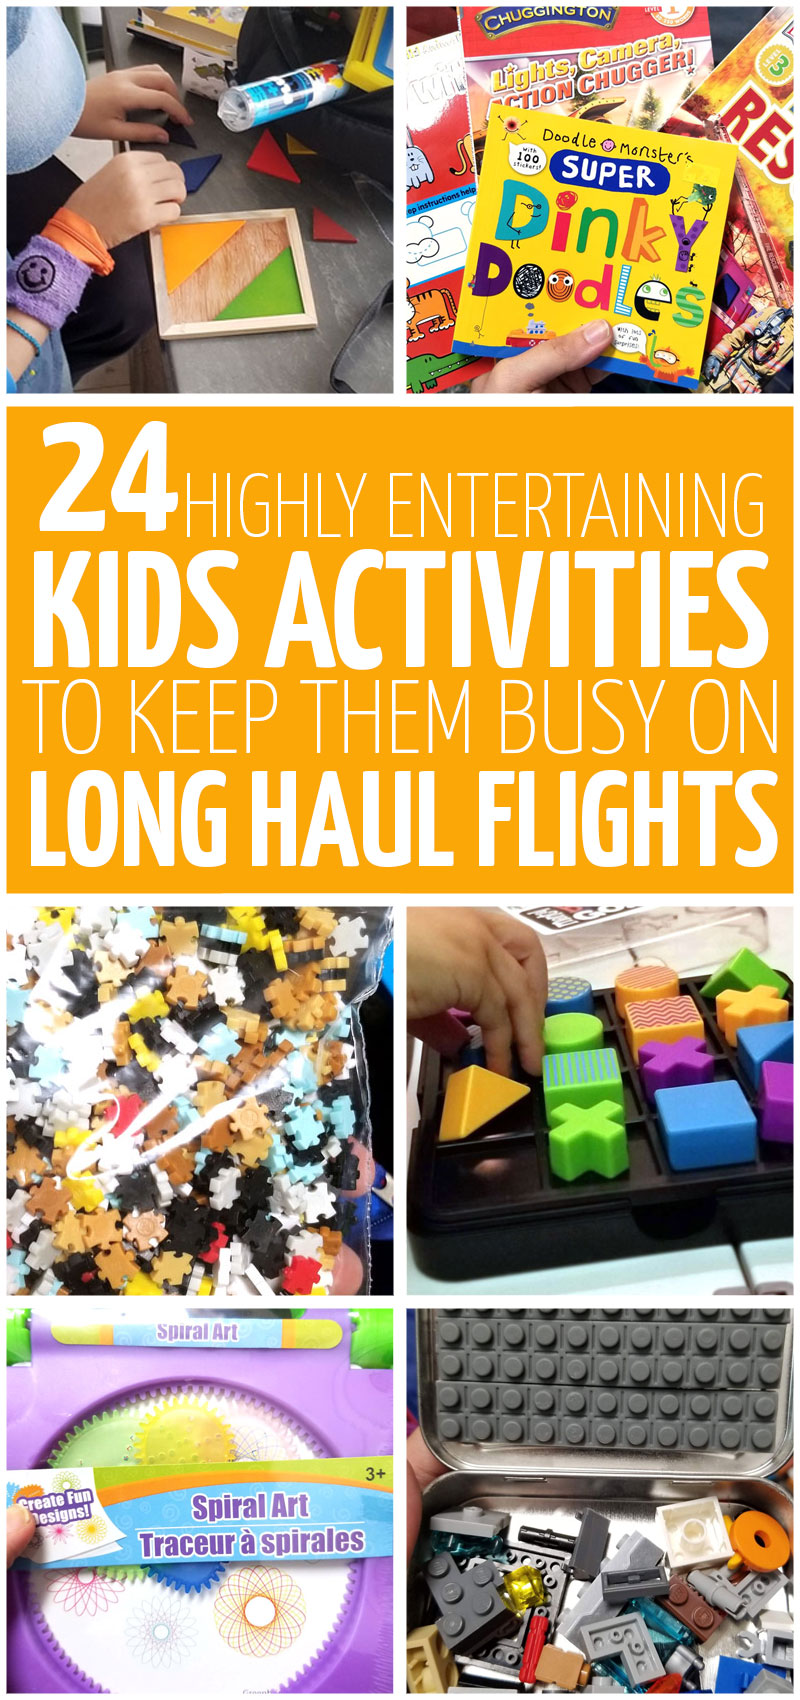 24 ways to entertain kids on long haul flights. Cheap airplane activities for kids that are easy and simple to put together and inexpensive to buy.